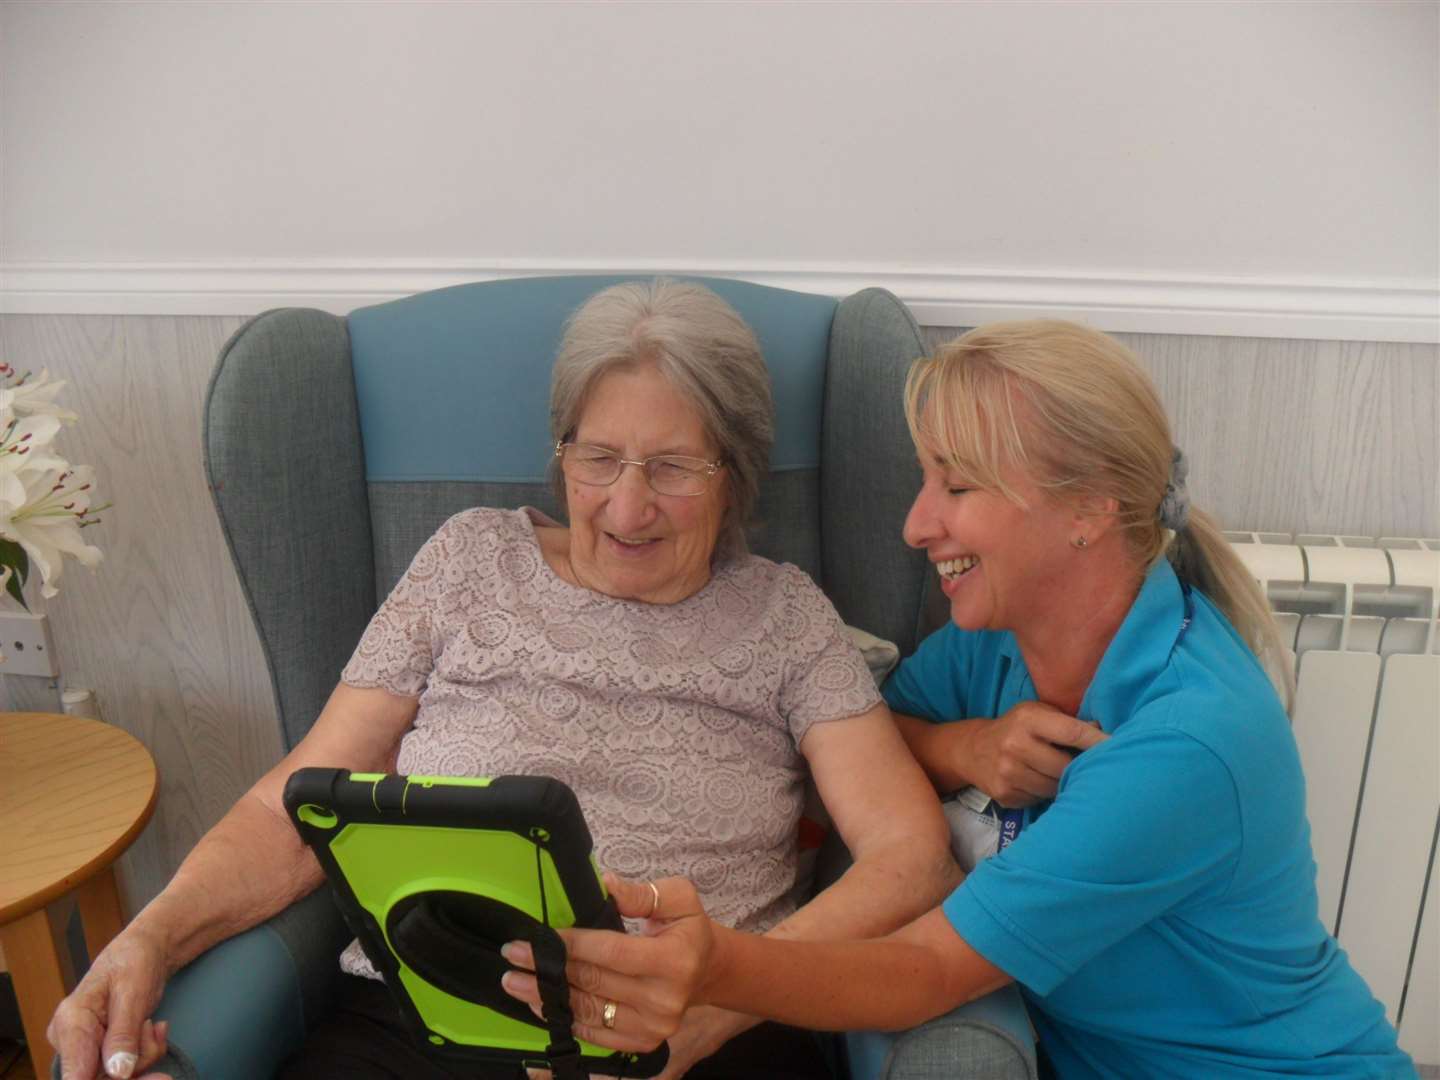 Marina Foreman, senior recreation and well-being lead at Woodstock Residential Care Centre, showing resident Barbara Woollett the tablet